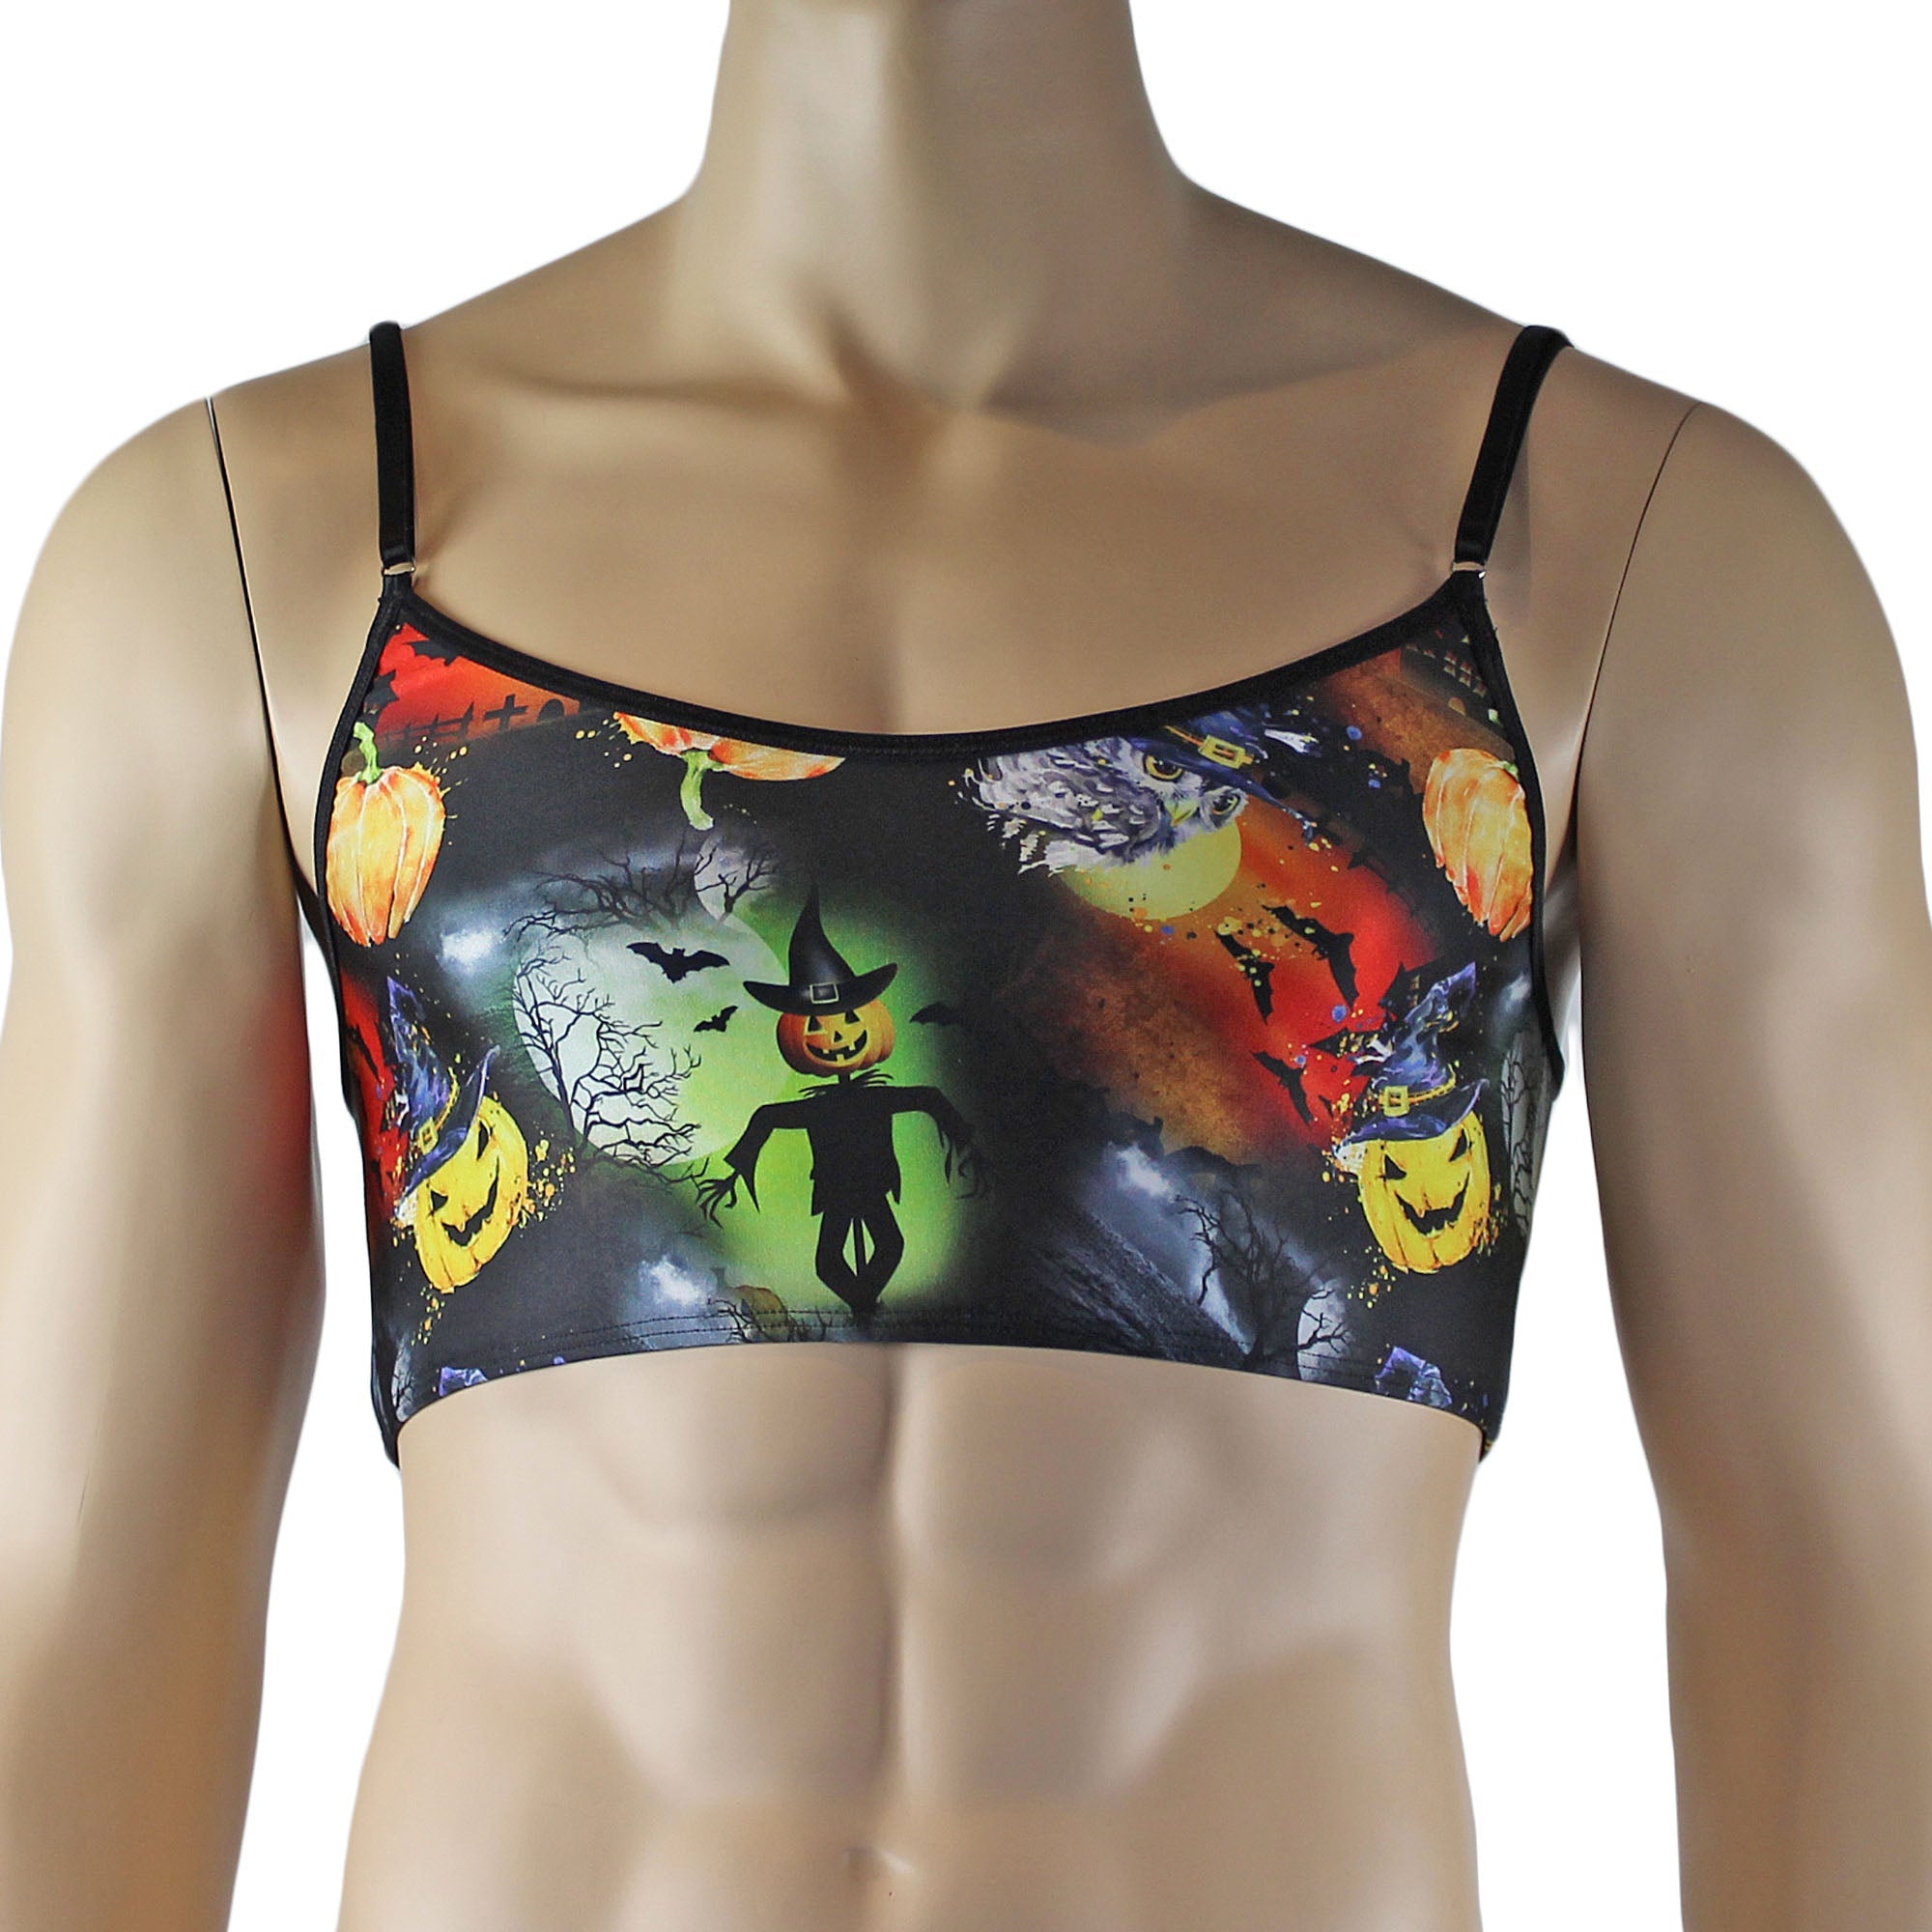 SALE Mens Halloween Witches Pumpkins and Bats Camisole Top